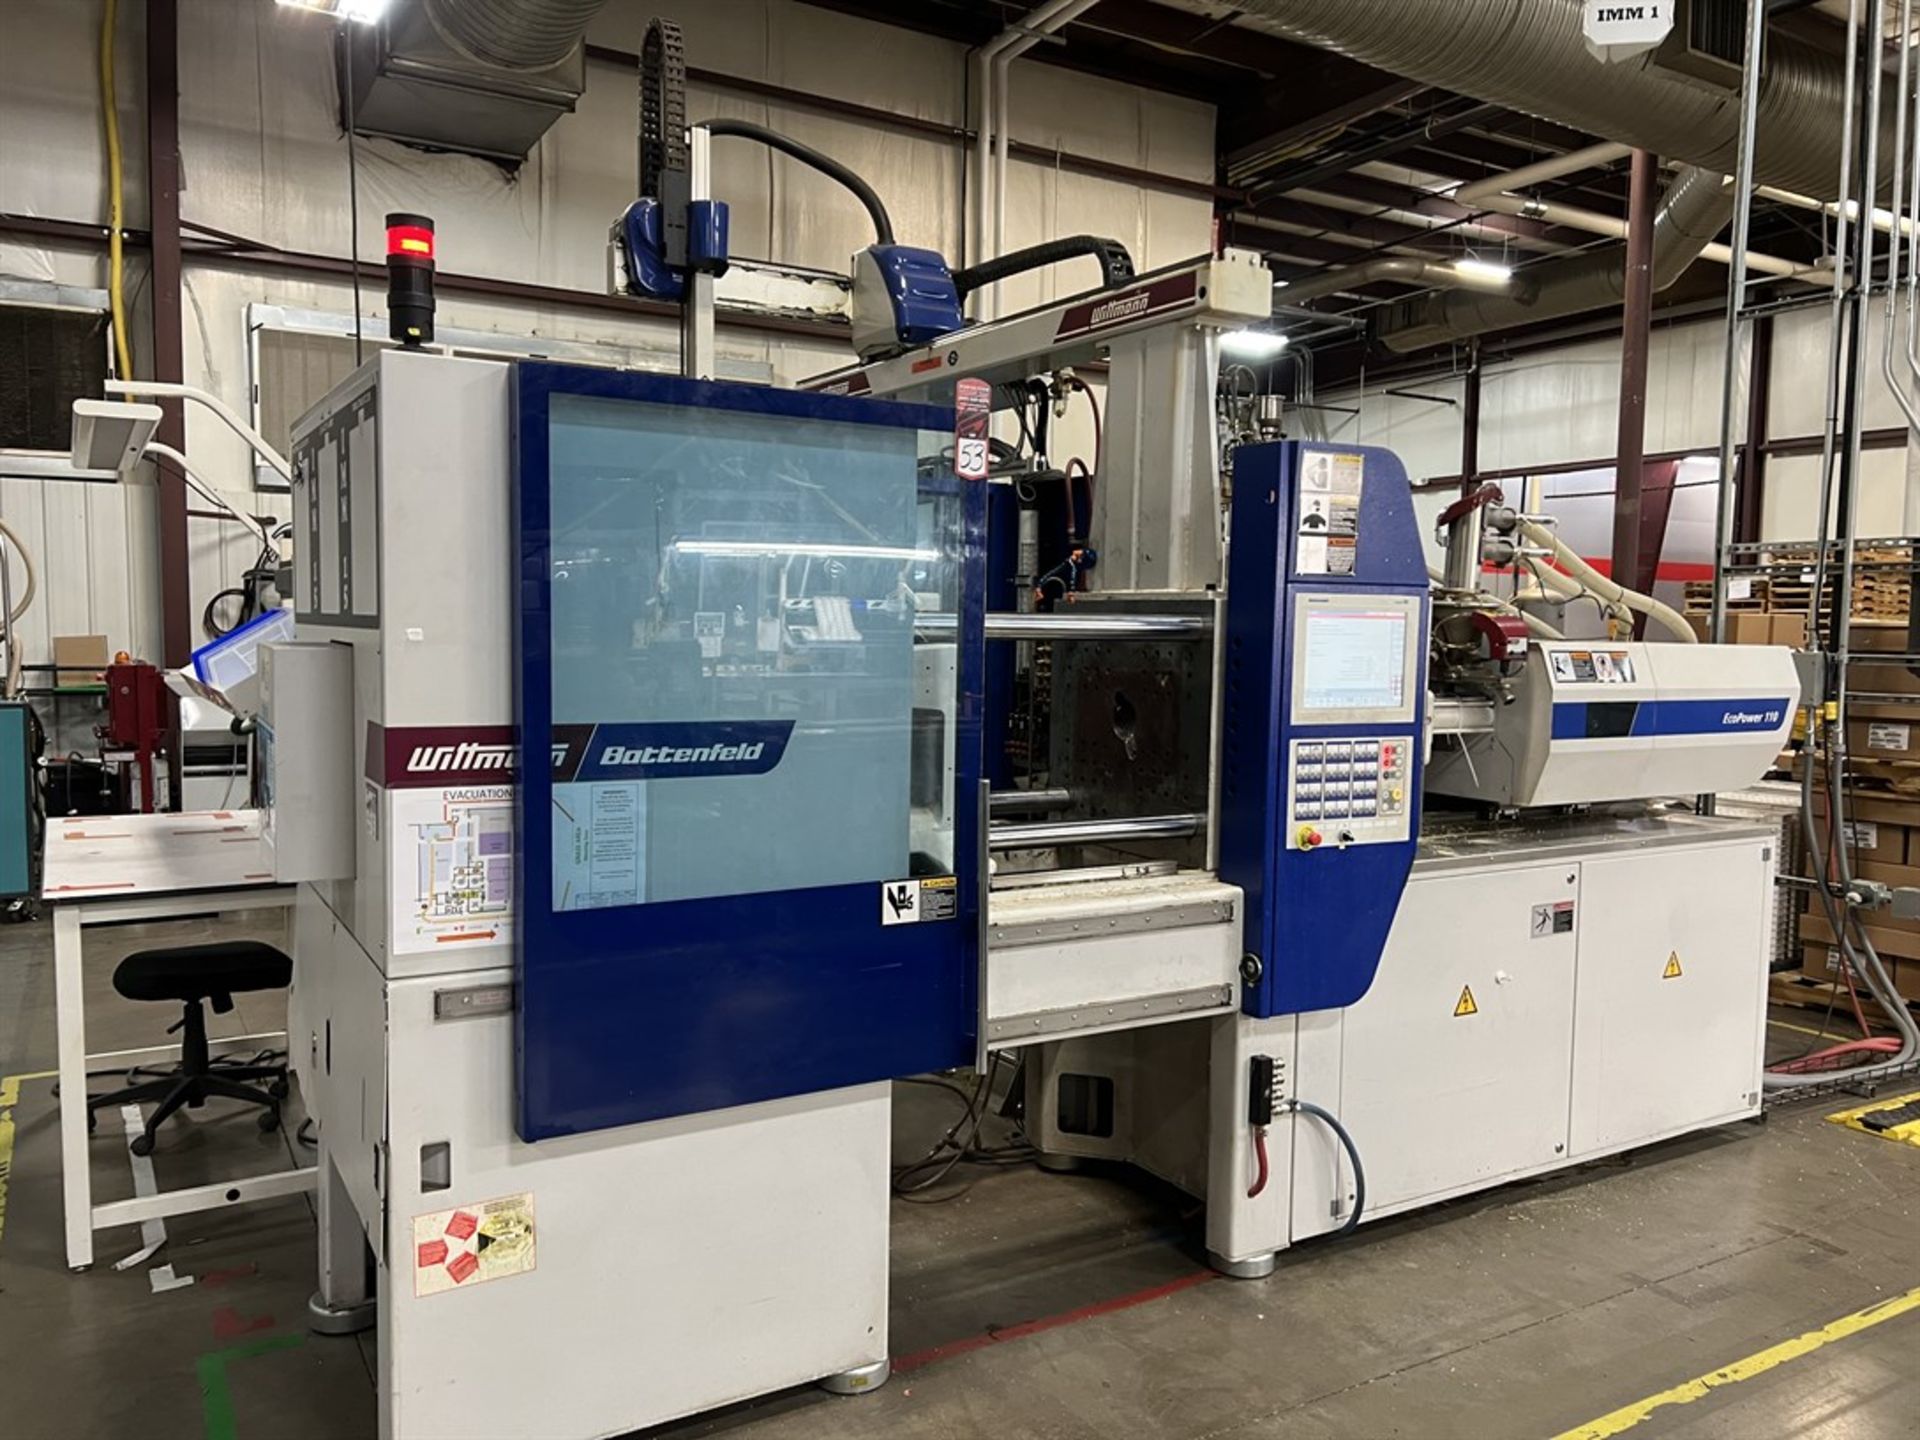 (PRESS ONLY) 2013 WITTMANN BATTENFELD ECOPOWER 110/350 Electric 110 Ton Injection Molder, s/n 134808 - Image 2 of 8